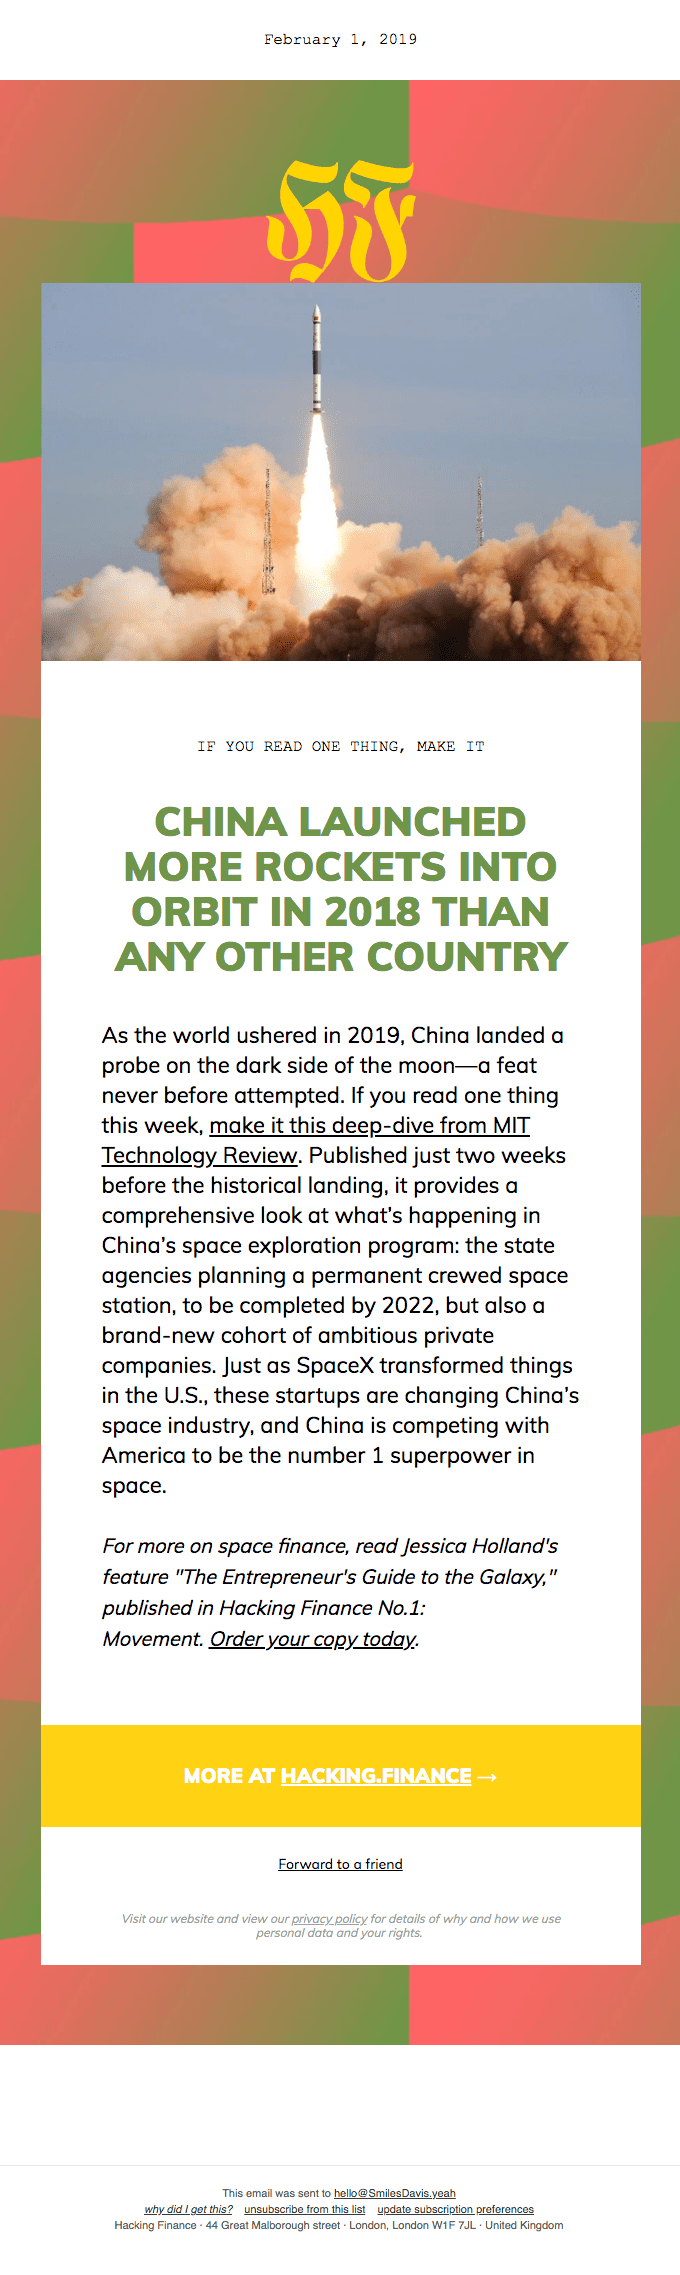 IYR1T: China’s Space Industry